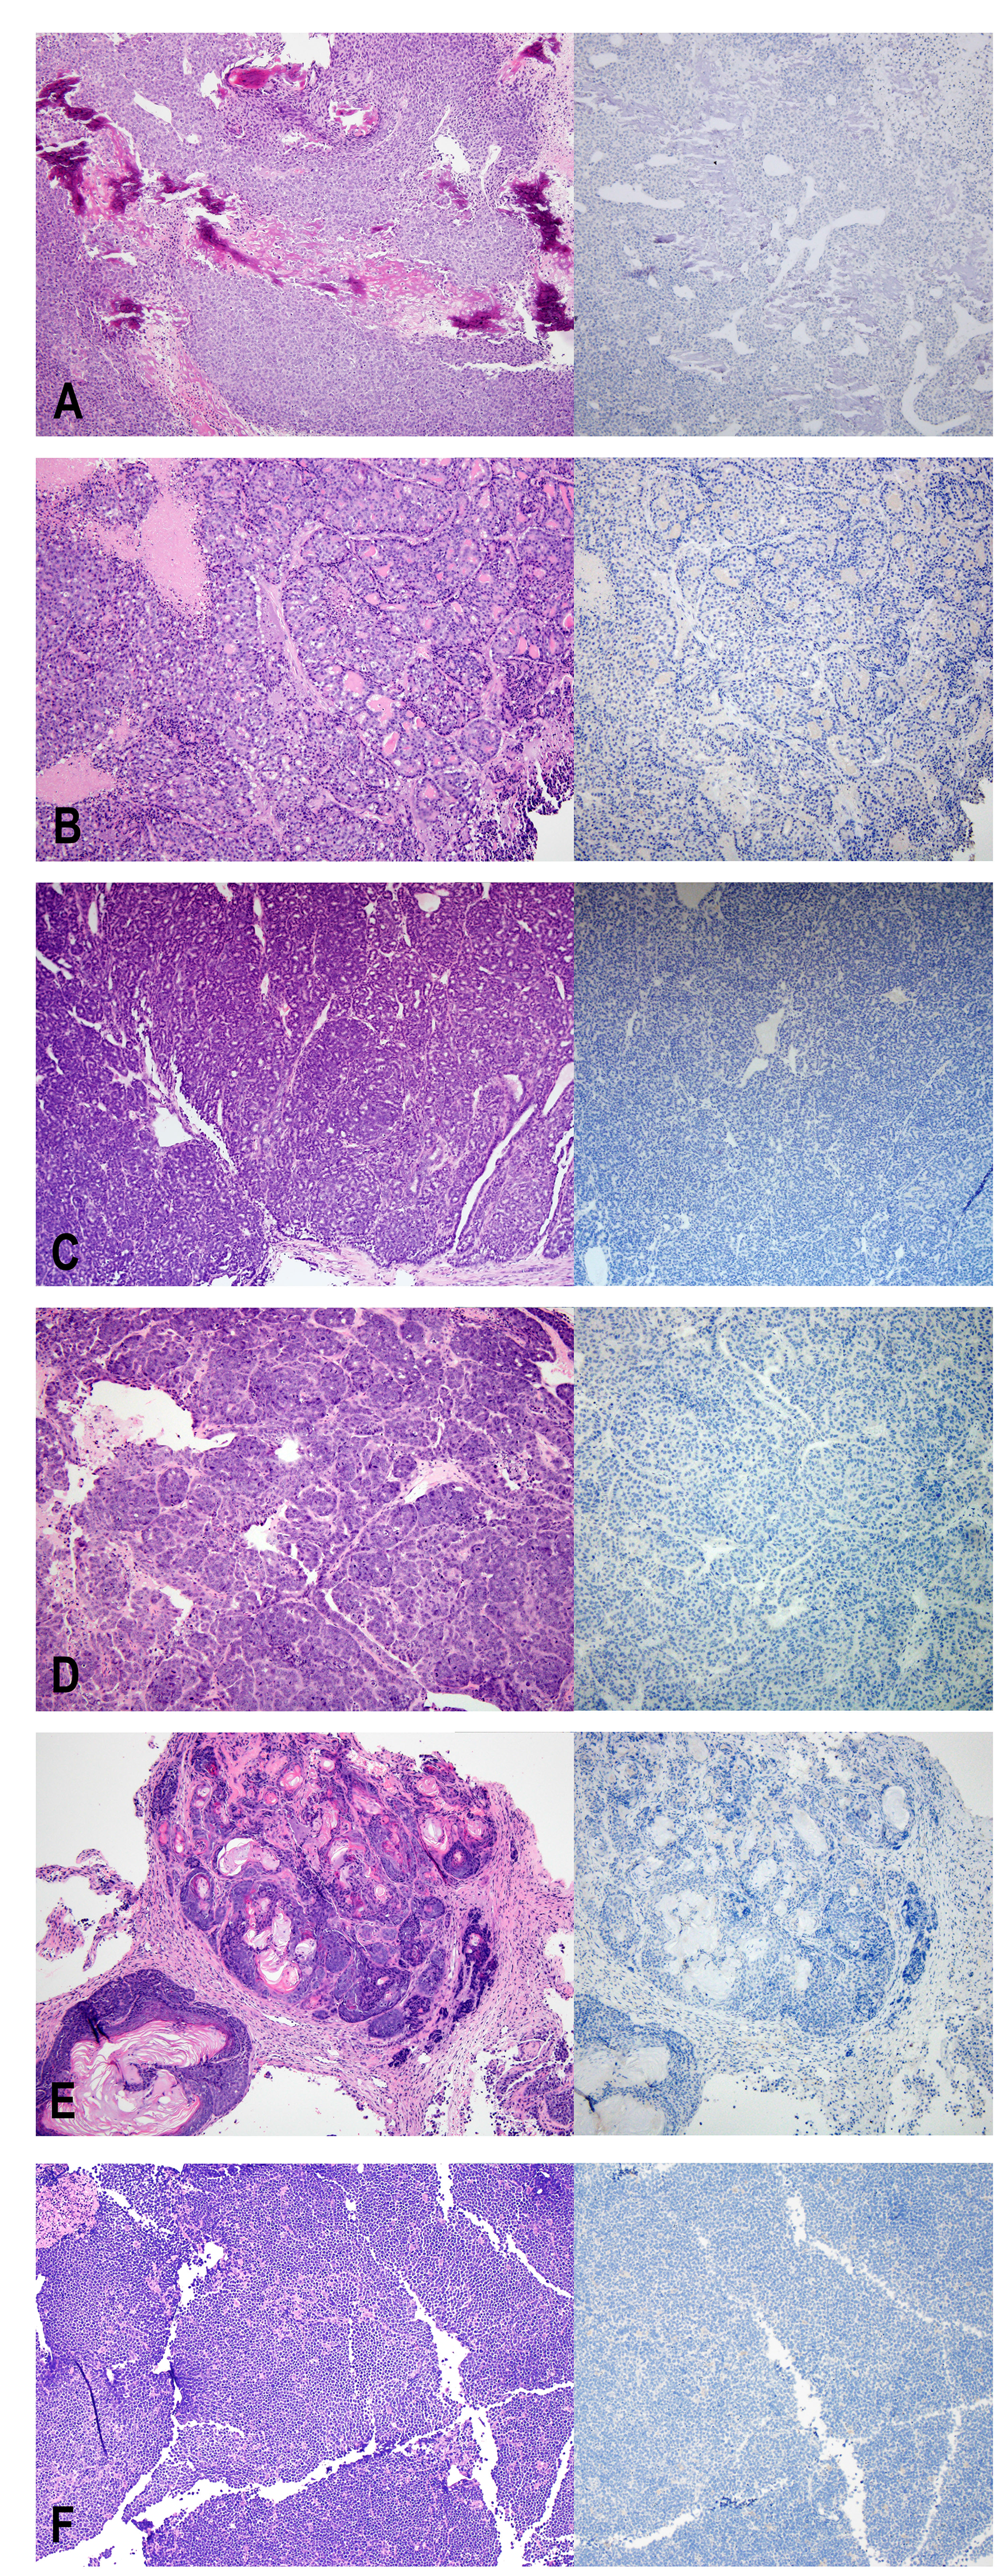 H&E (left) and Ki67 (right) staining of non-human tumors identified at the injection site.